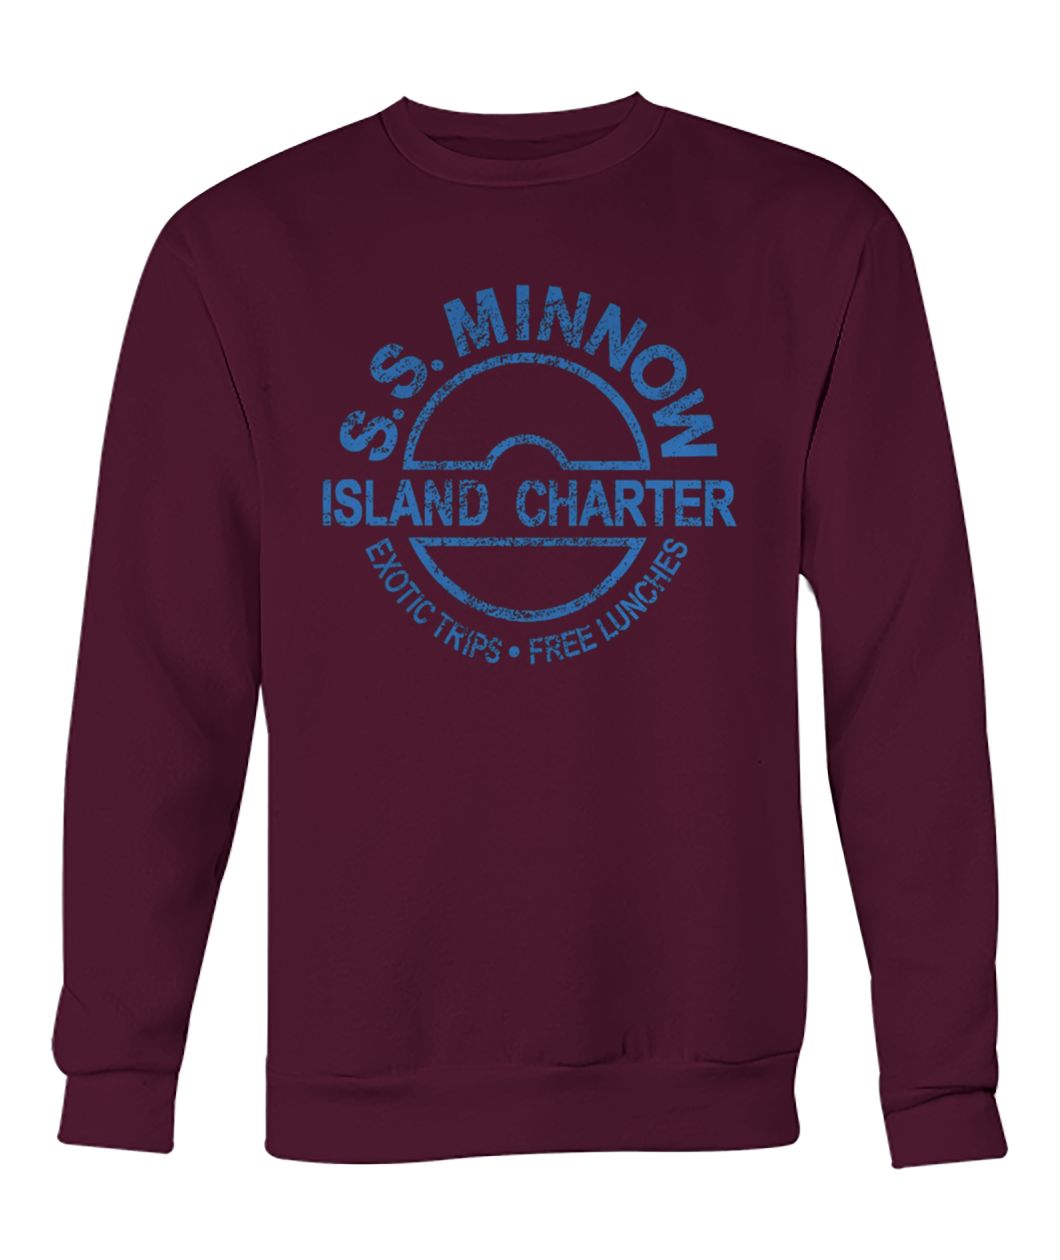 SS minnow island charter exotic trips free lunches crew neck sweatshirt